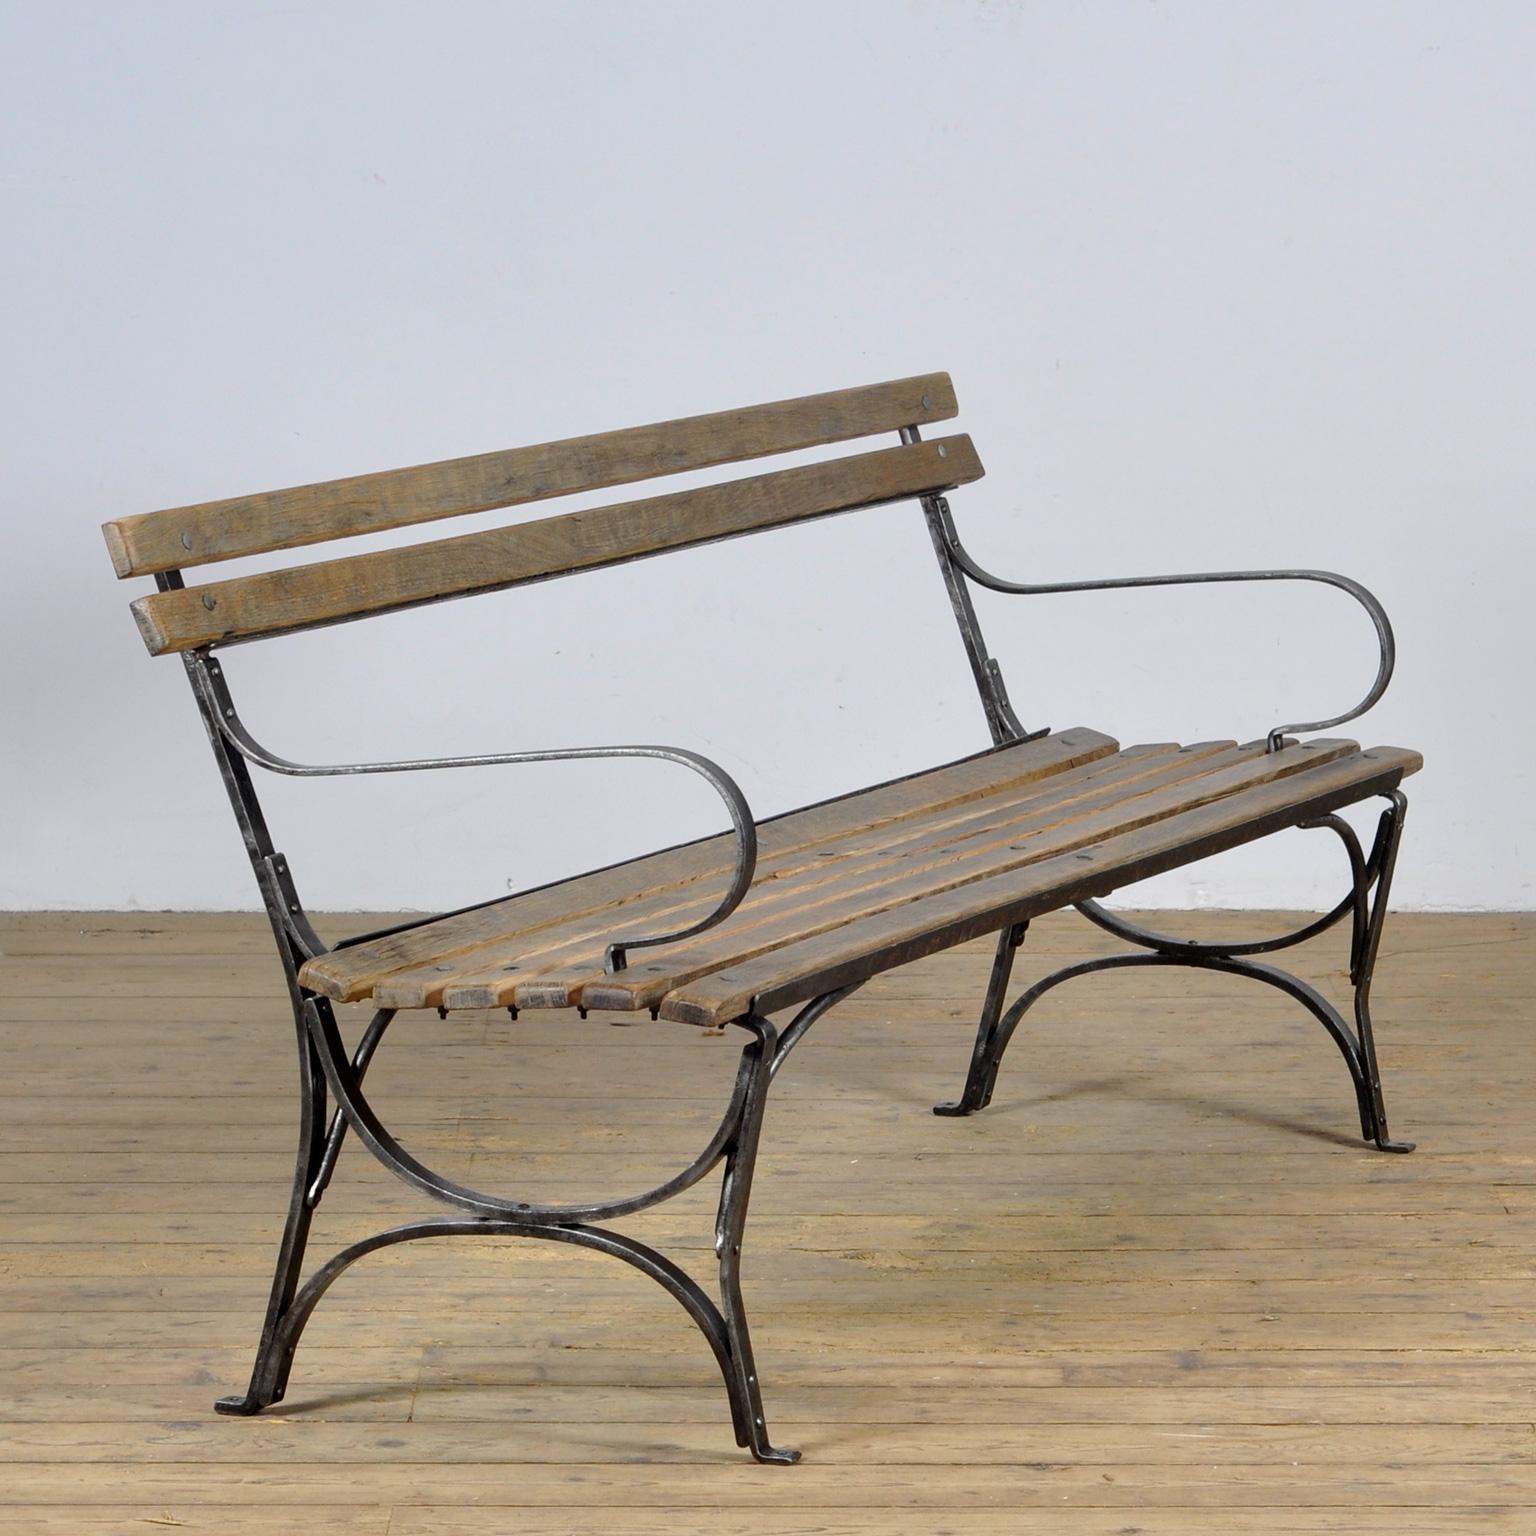 Industrial Riveted Iron Park Bench, 1920s